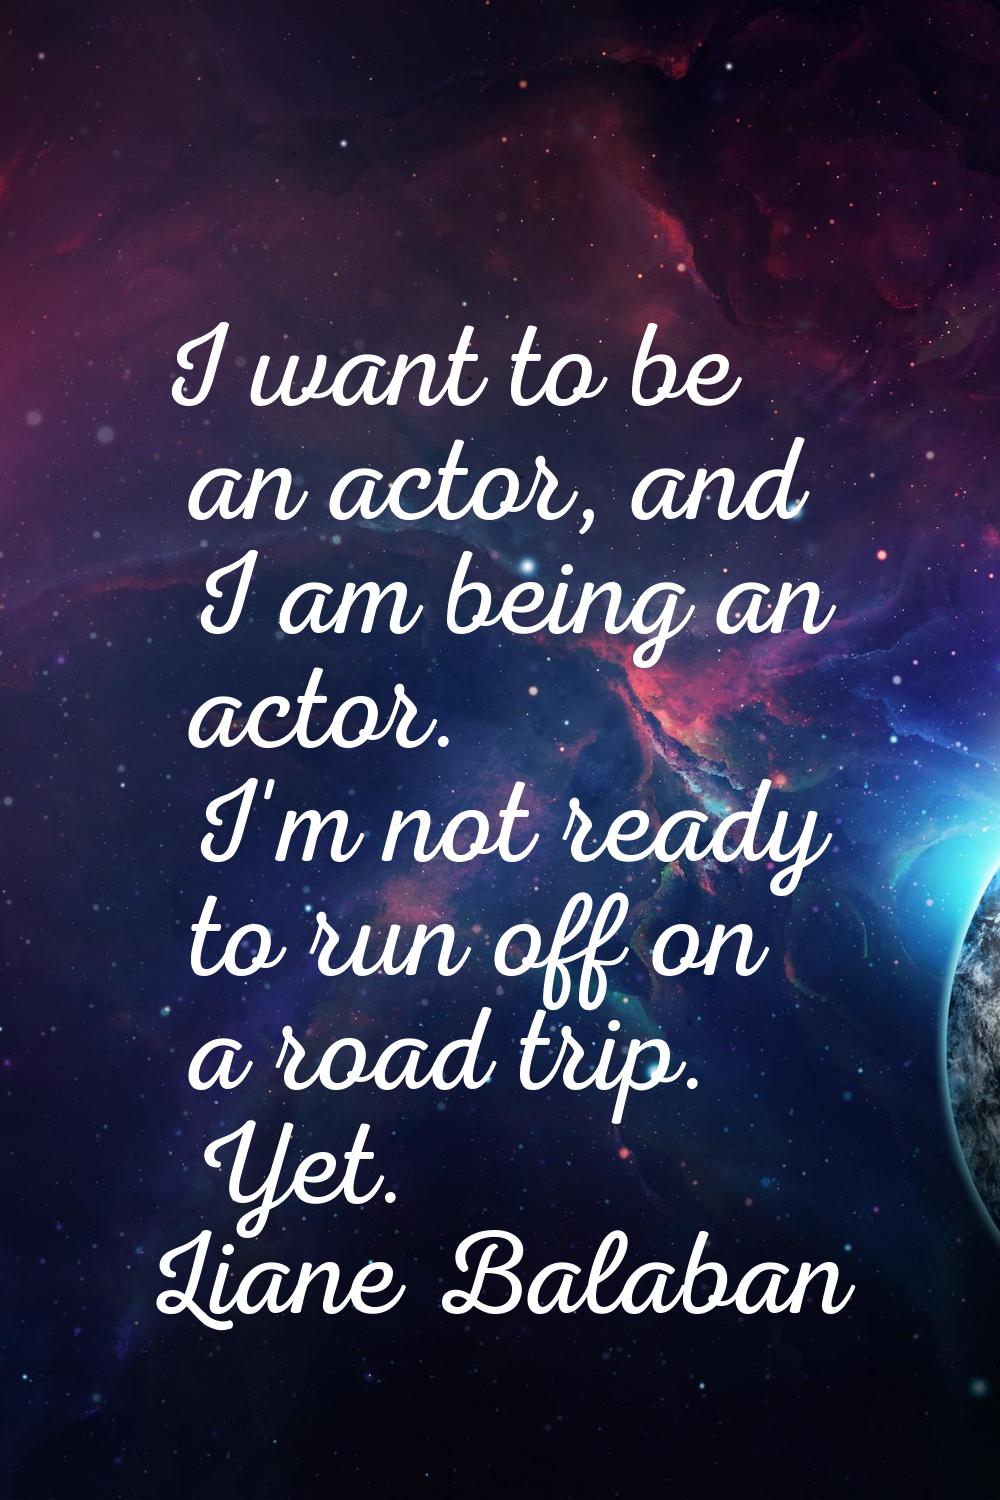 I want to be an actor, and I am being an actor. I'm not ready to run off on a road trip. Yet.